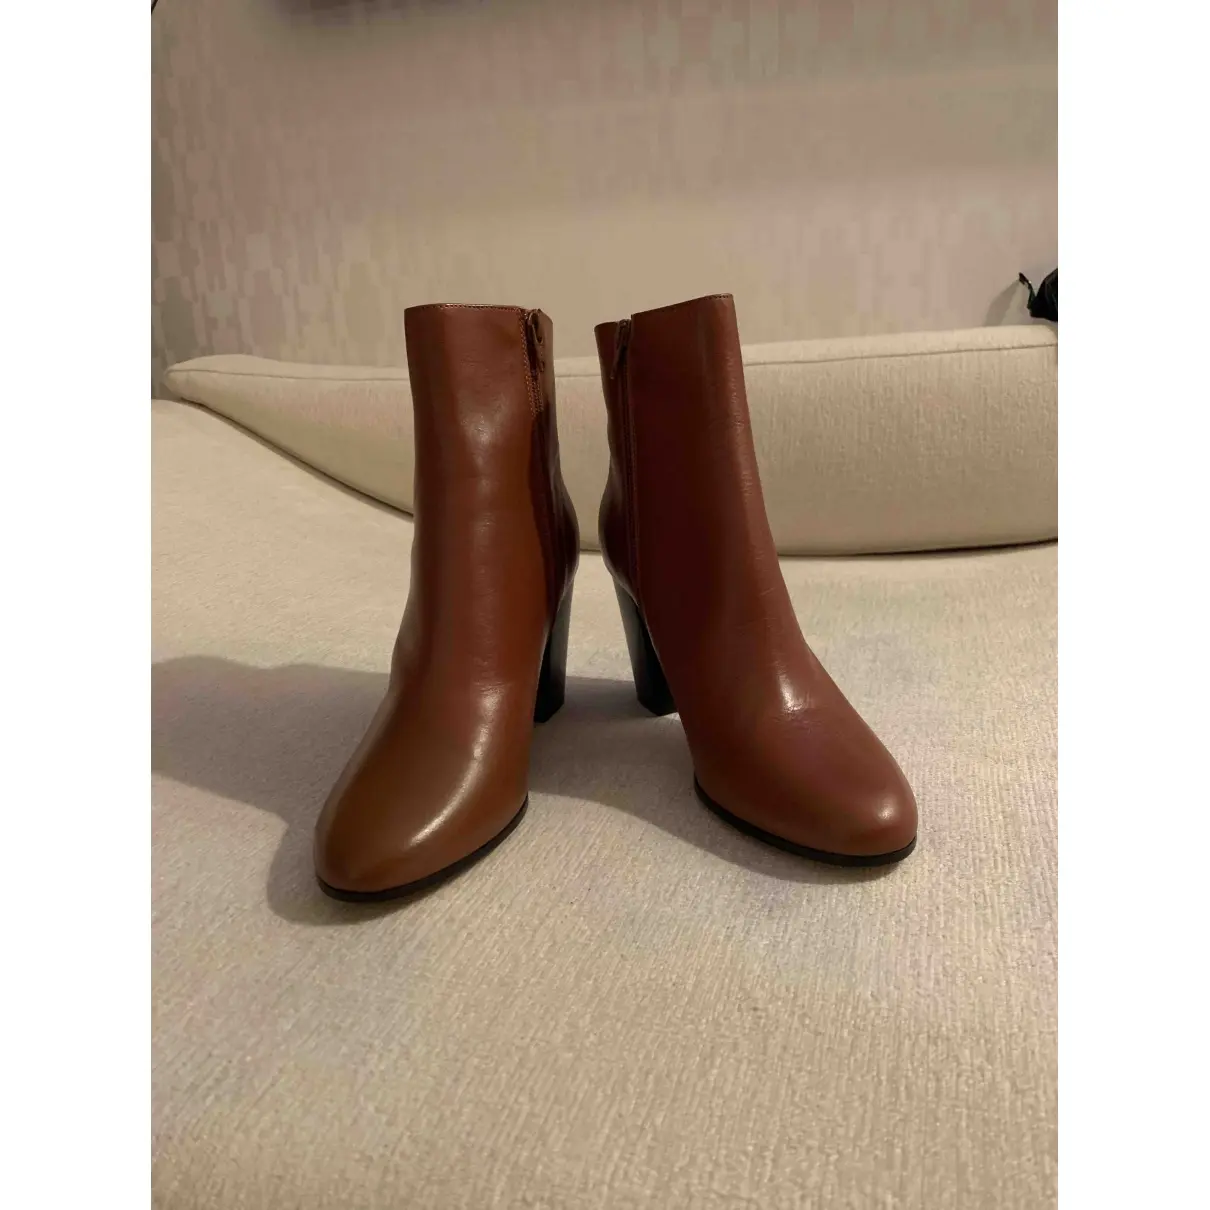 Maje FW19 leather ankle boots for sale